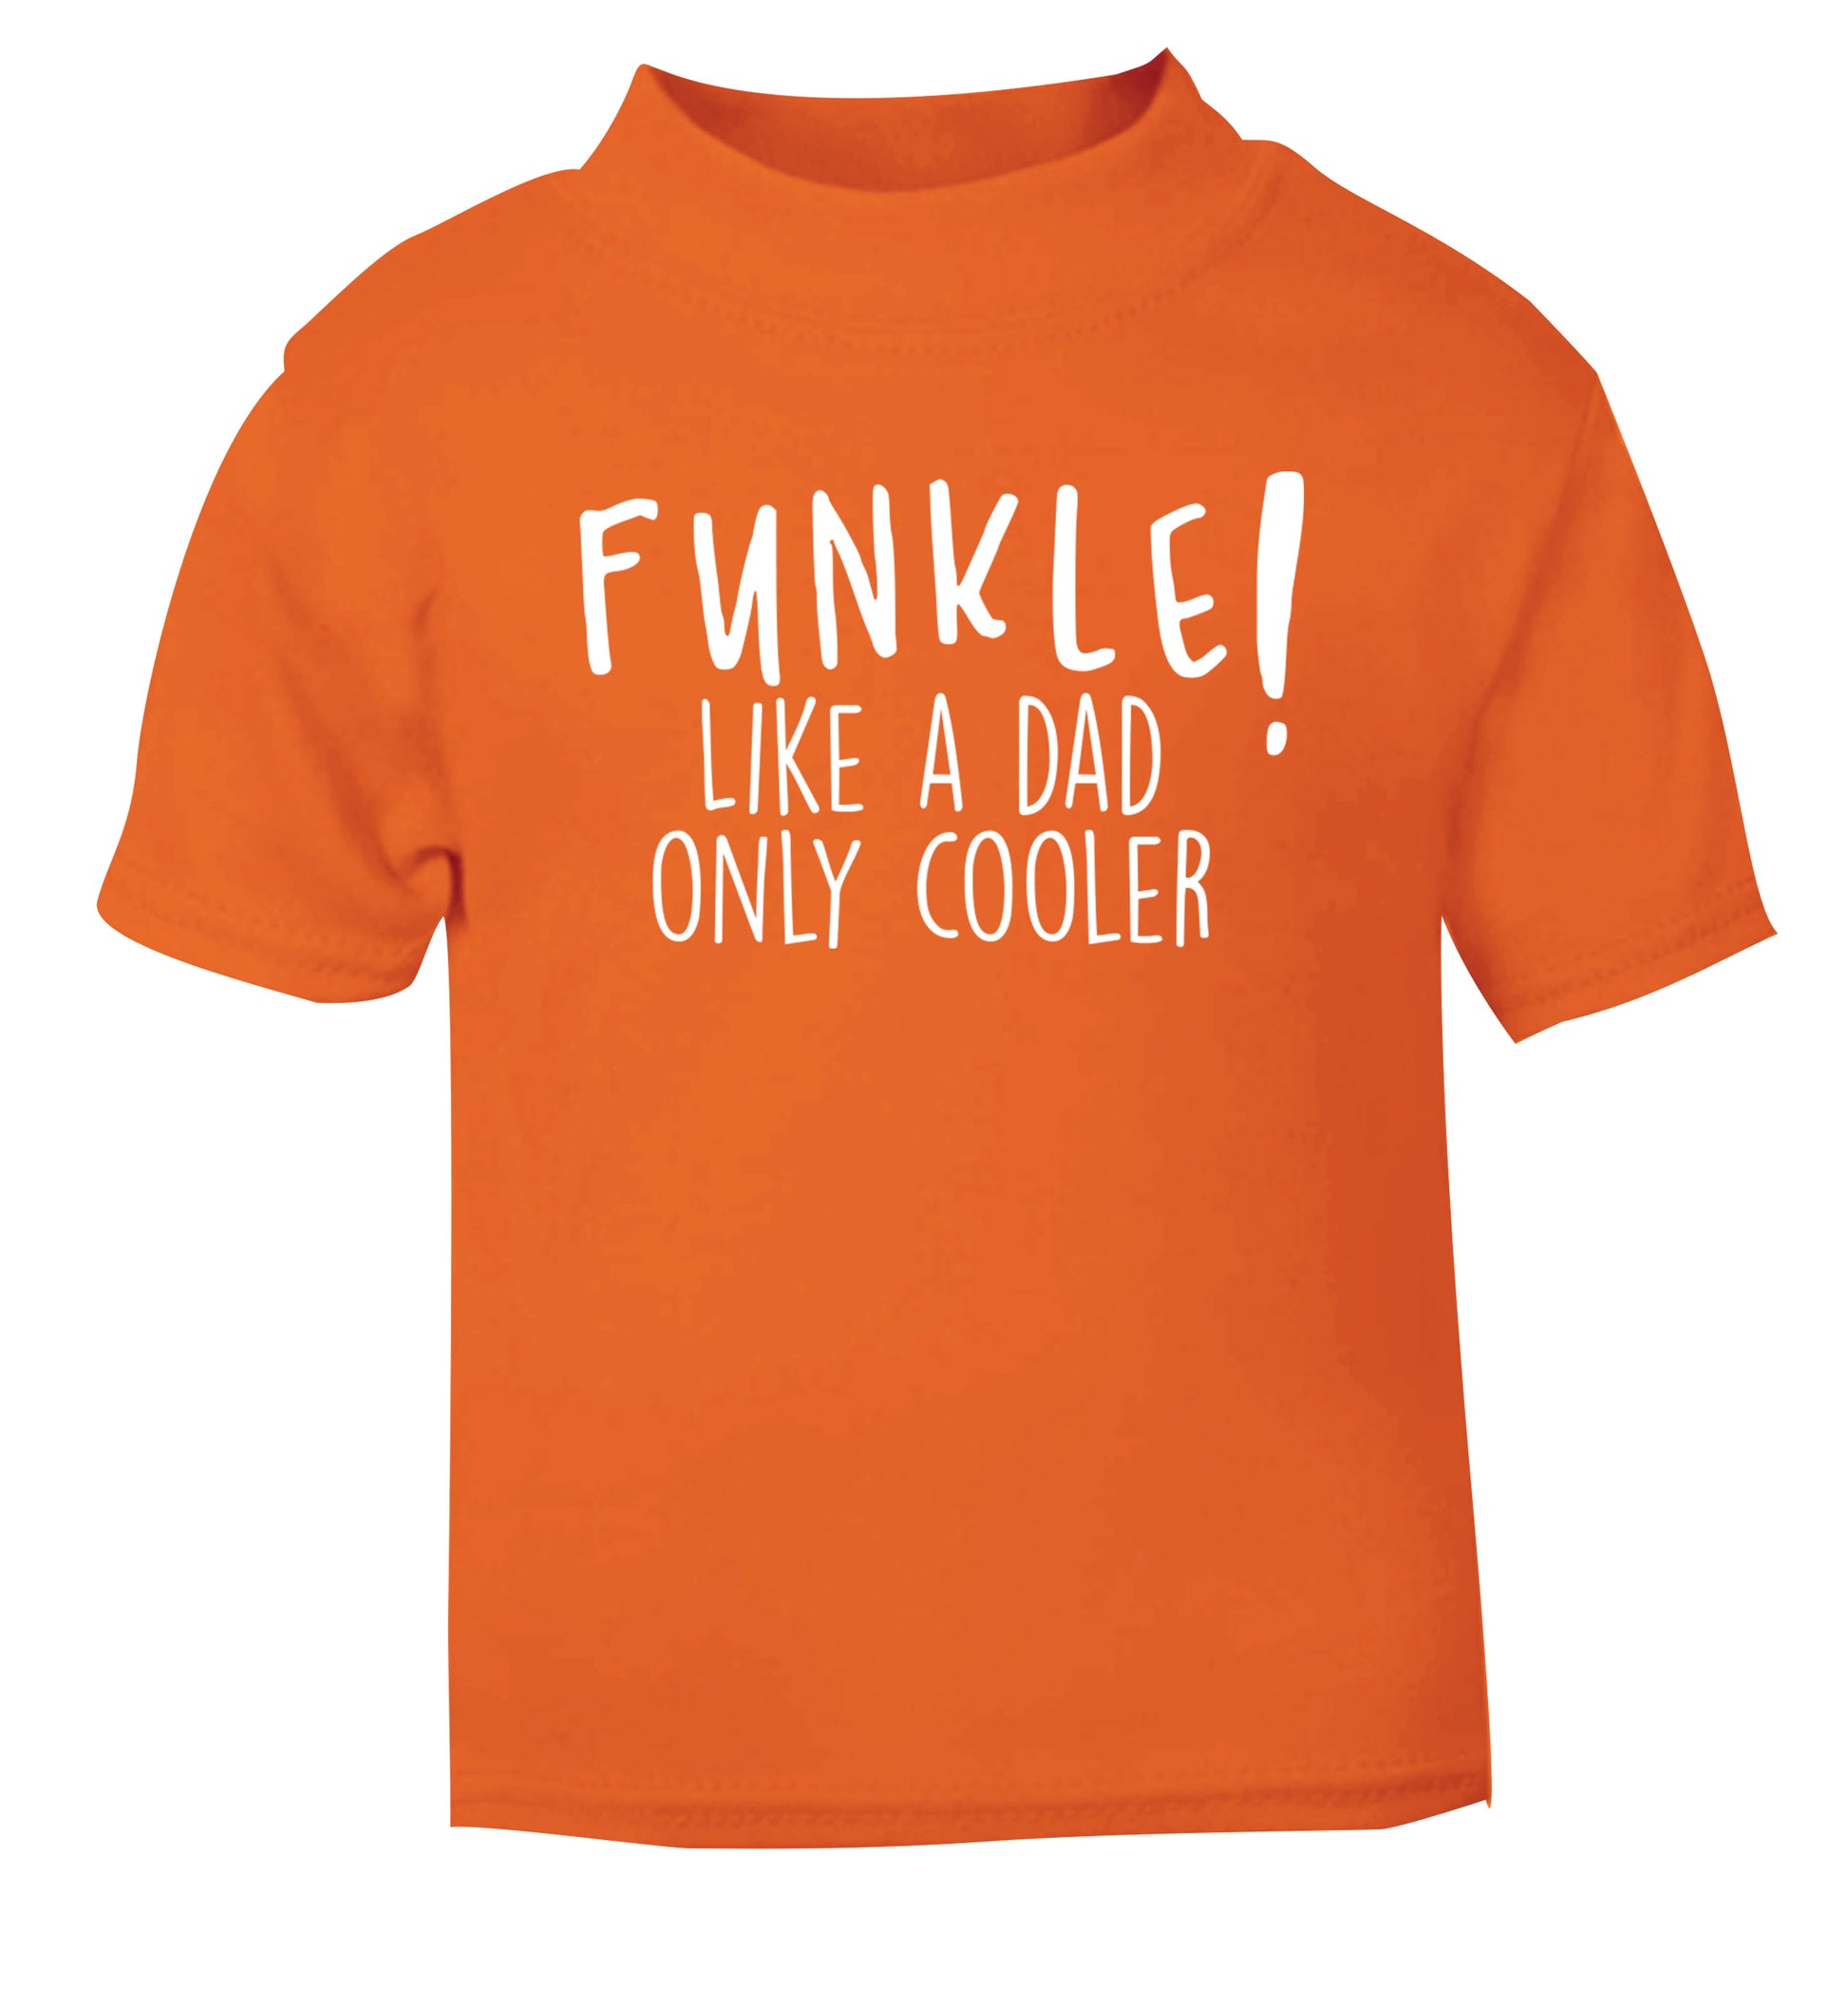 Funkle Like a Dad Only Cooler orange Baby Toddler Tshirt 2 Years